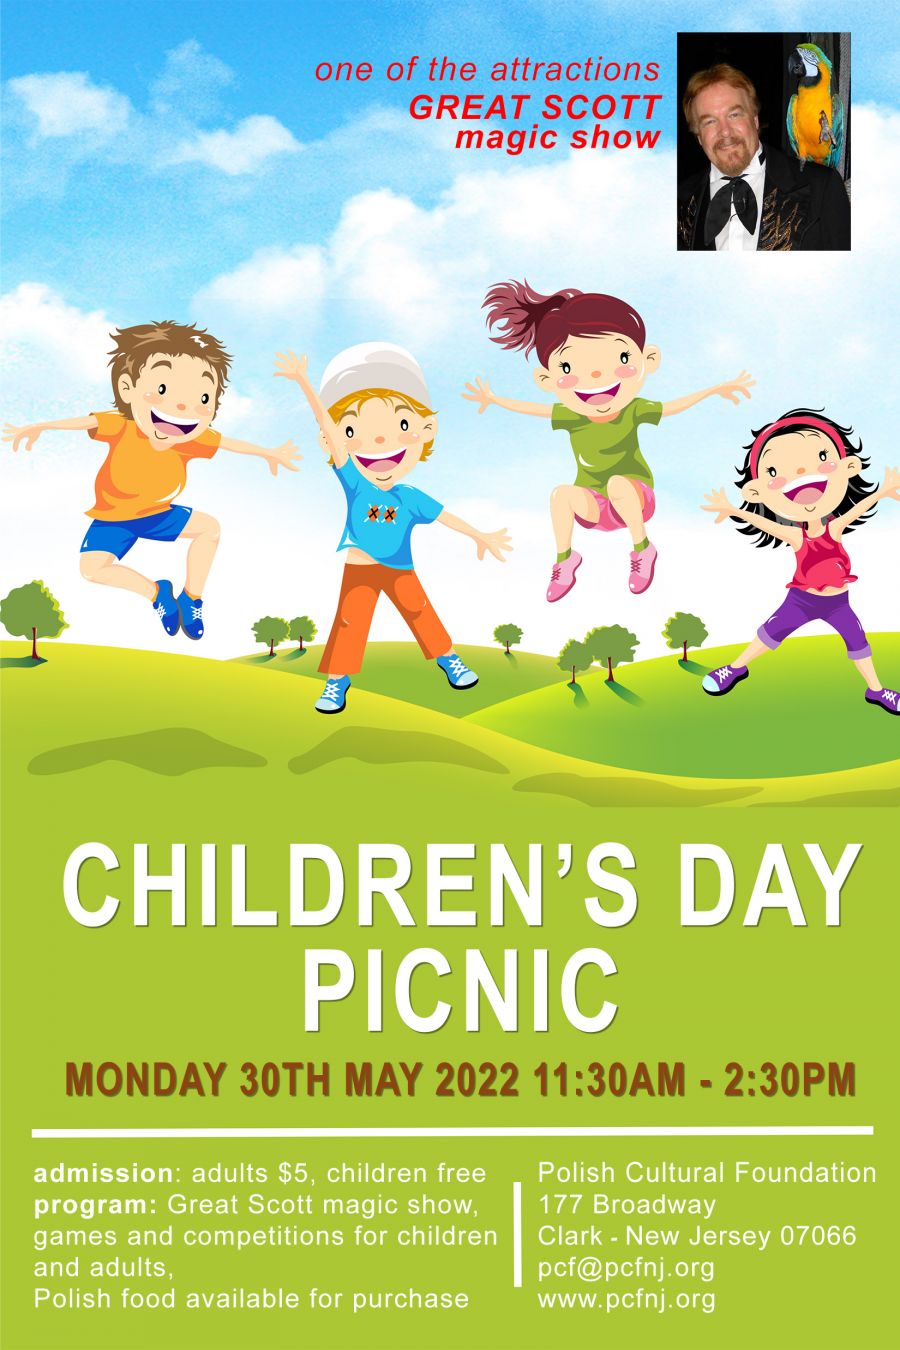 Memorial Day Parade and Children's Day Picnic